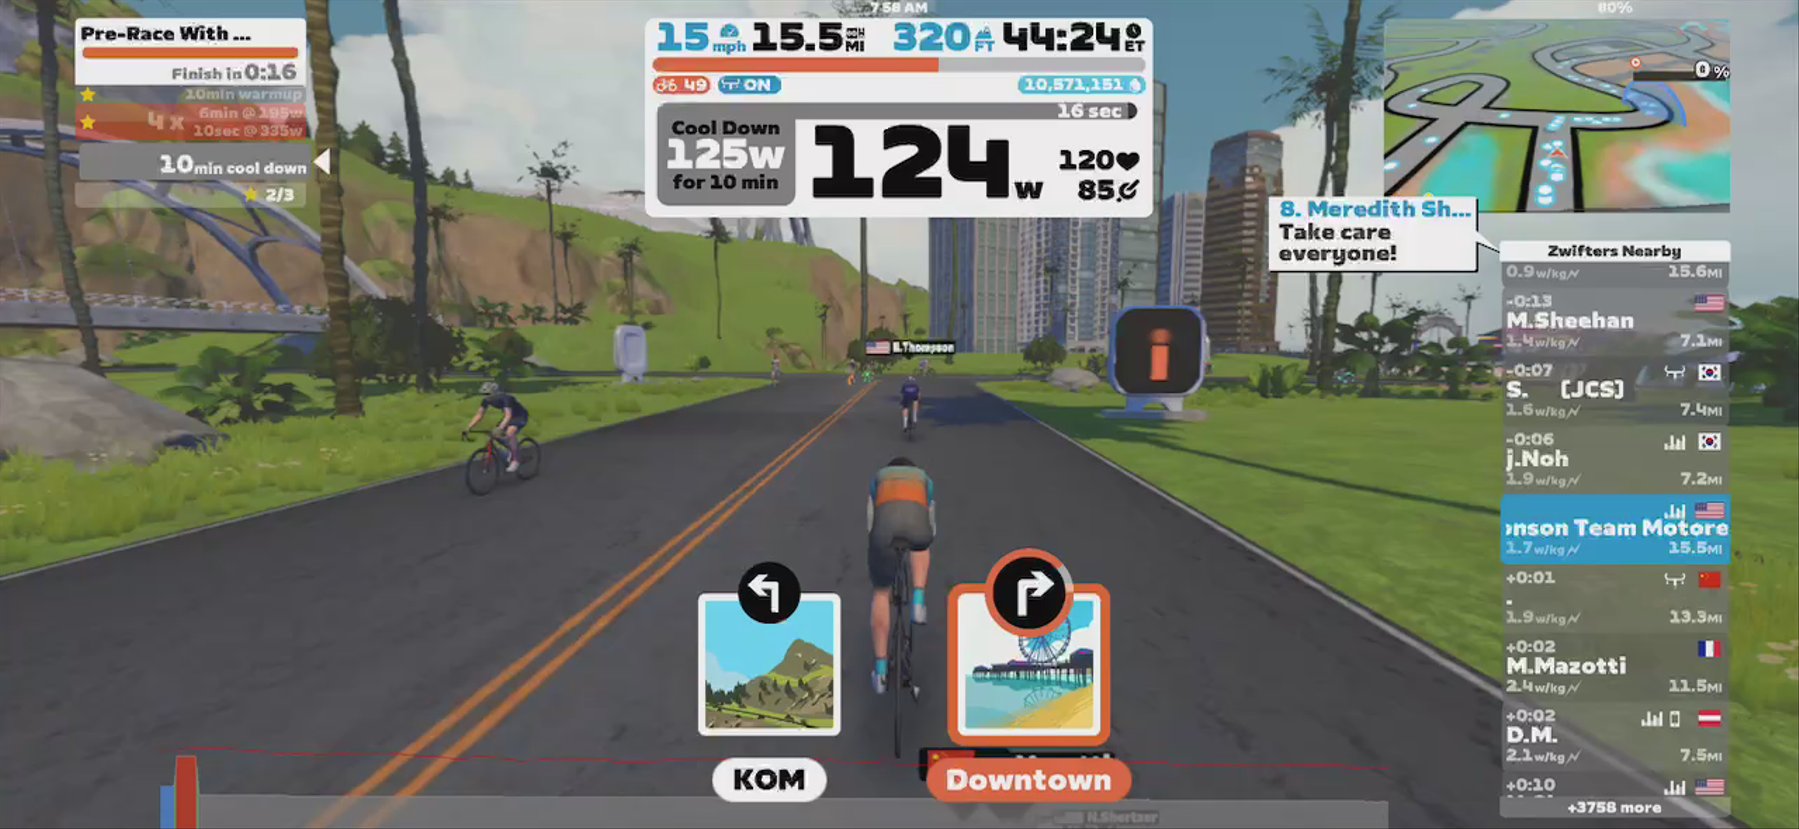 Zwift - Pre-Race With Spin-Ups in Watopia